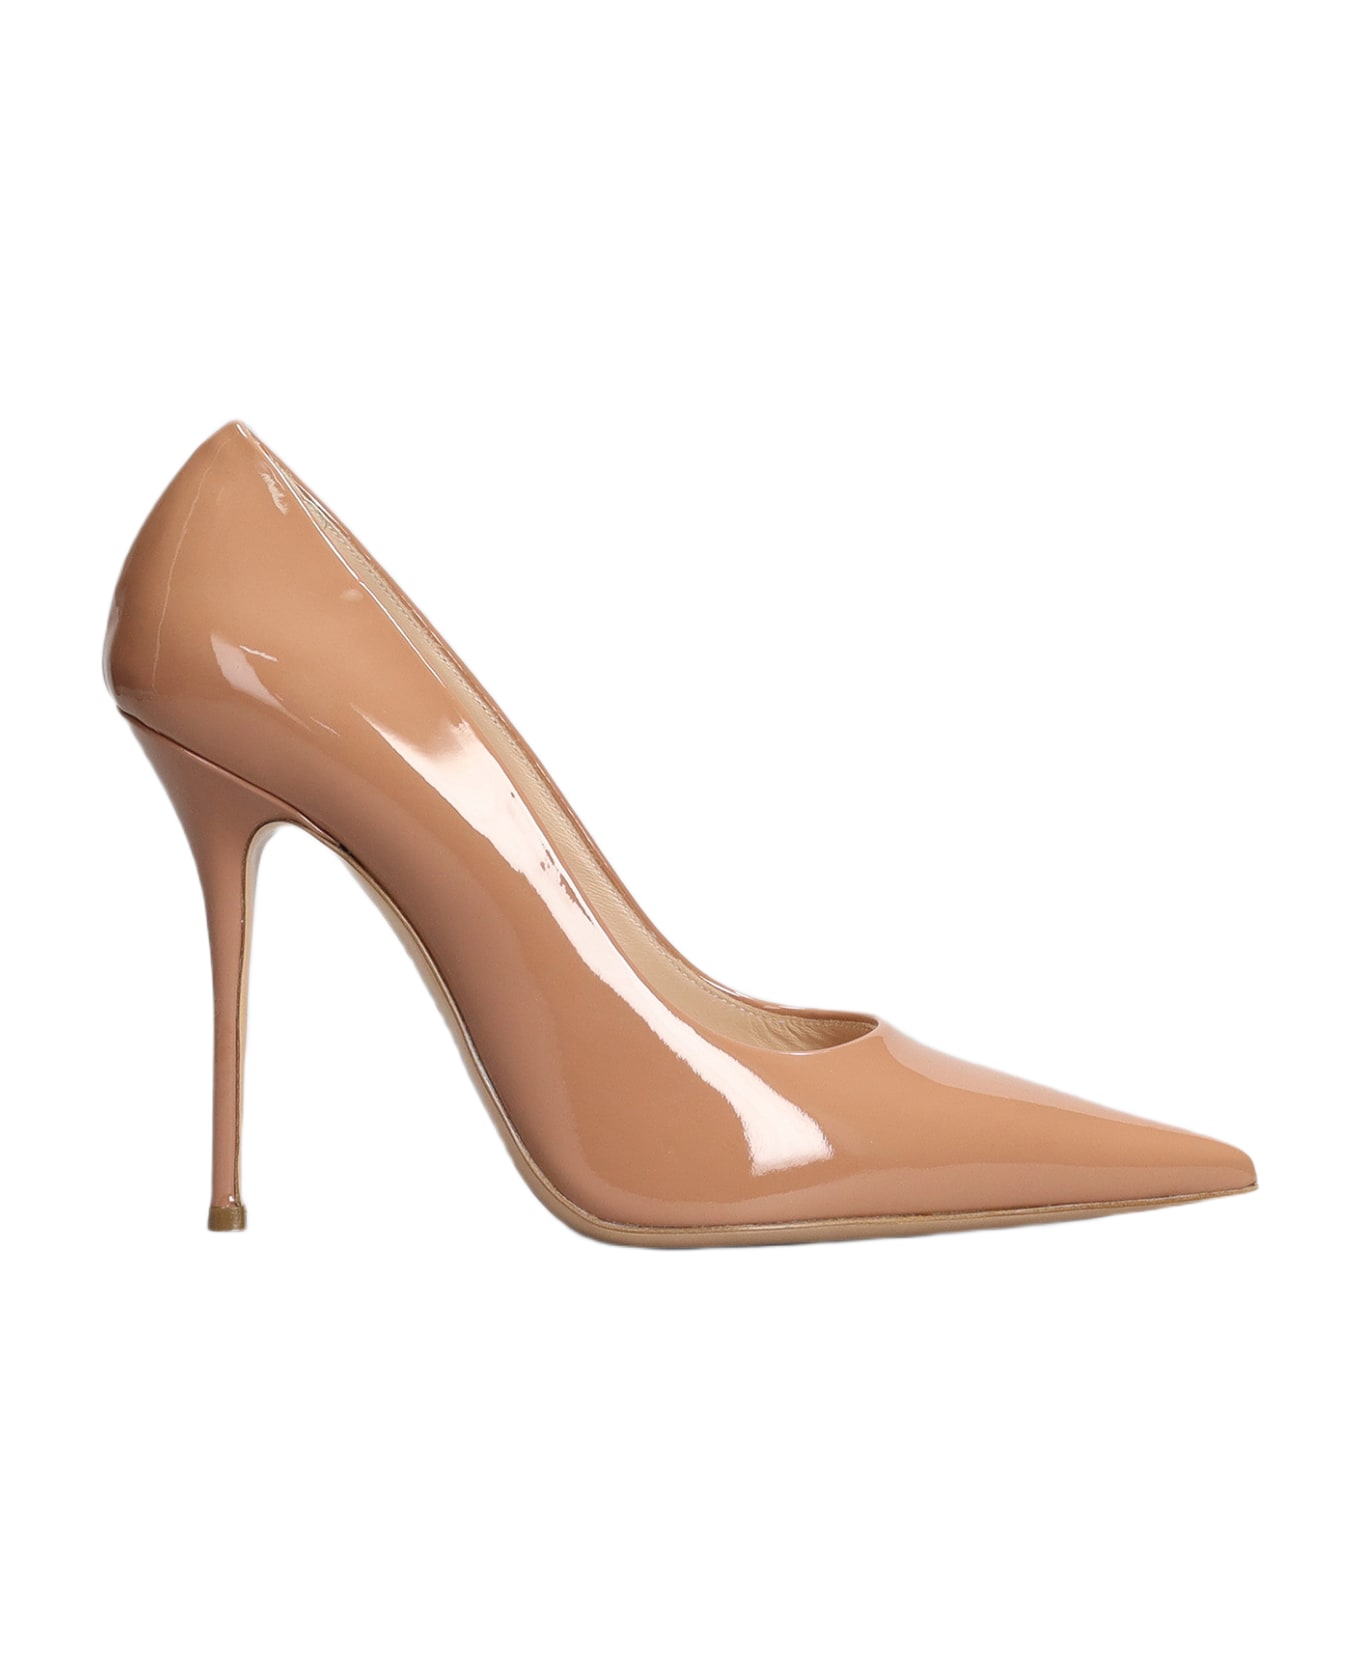 Casadei Pumps In Powder Patent Leather - powder ハイヒール